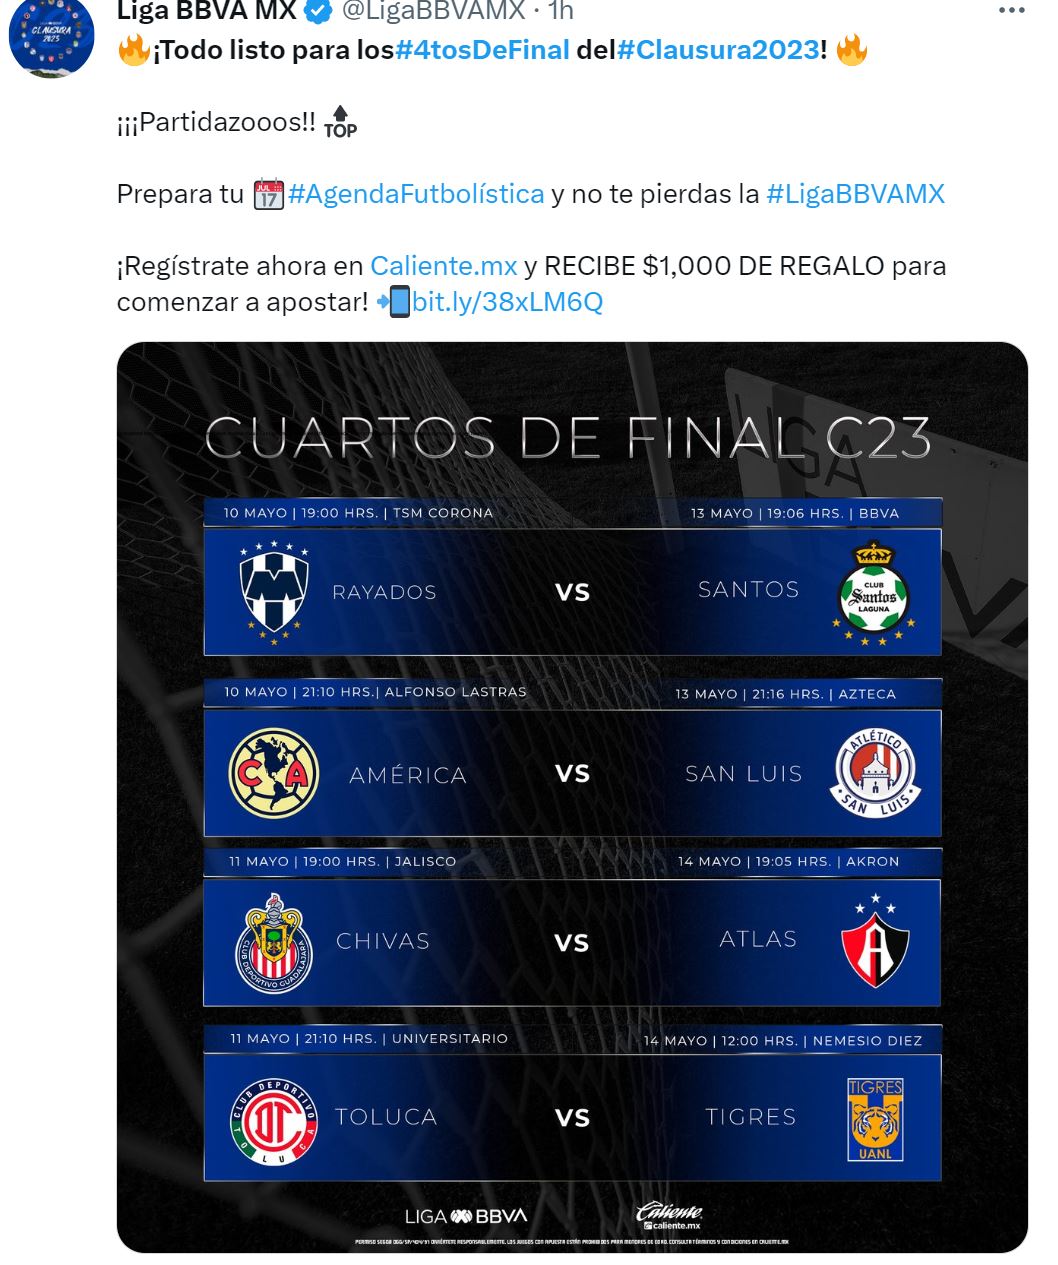 The schedules of the Quarterfinals of the Clausura 2023 are ready.